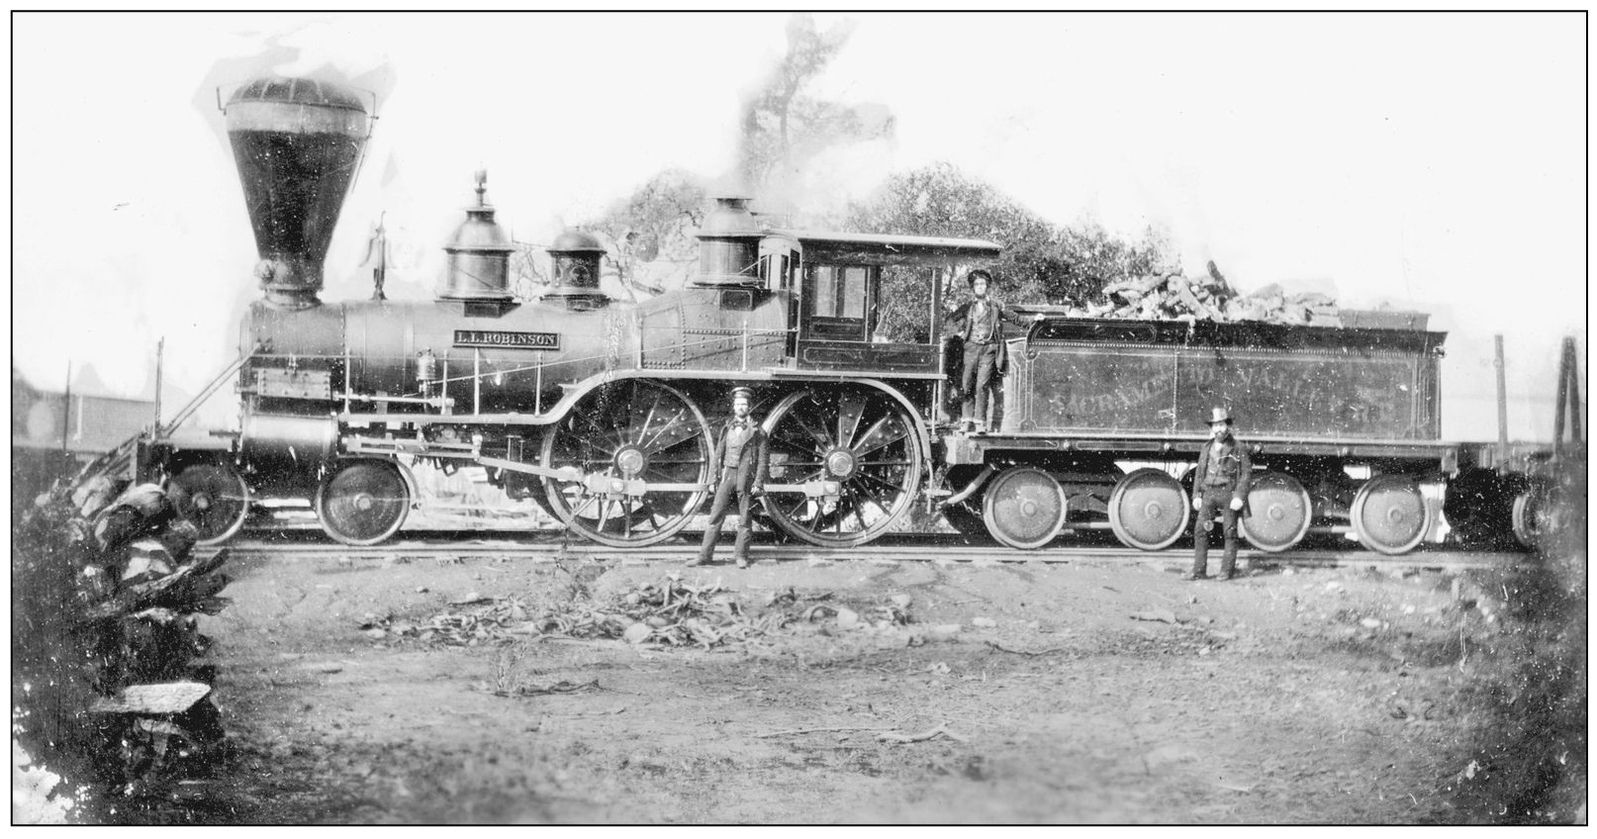 The SVRR used wood-burning steam locomotives like this one the L L Robinson - photo 5